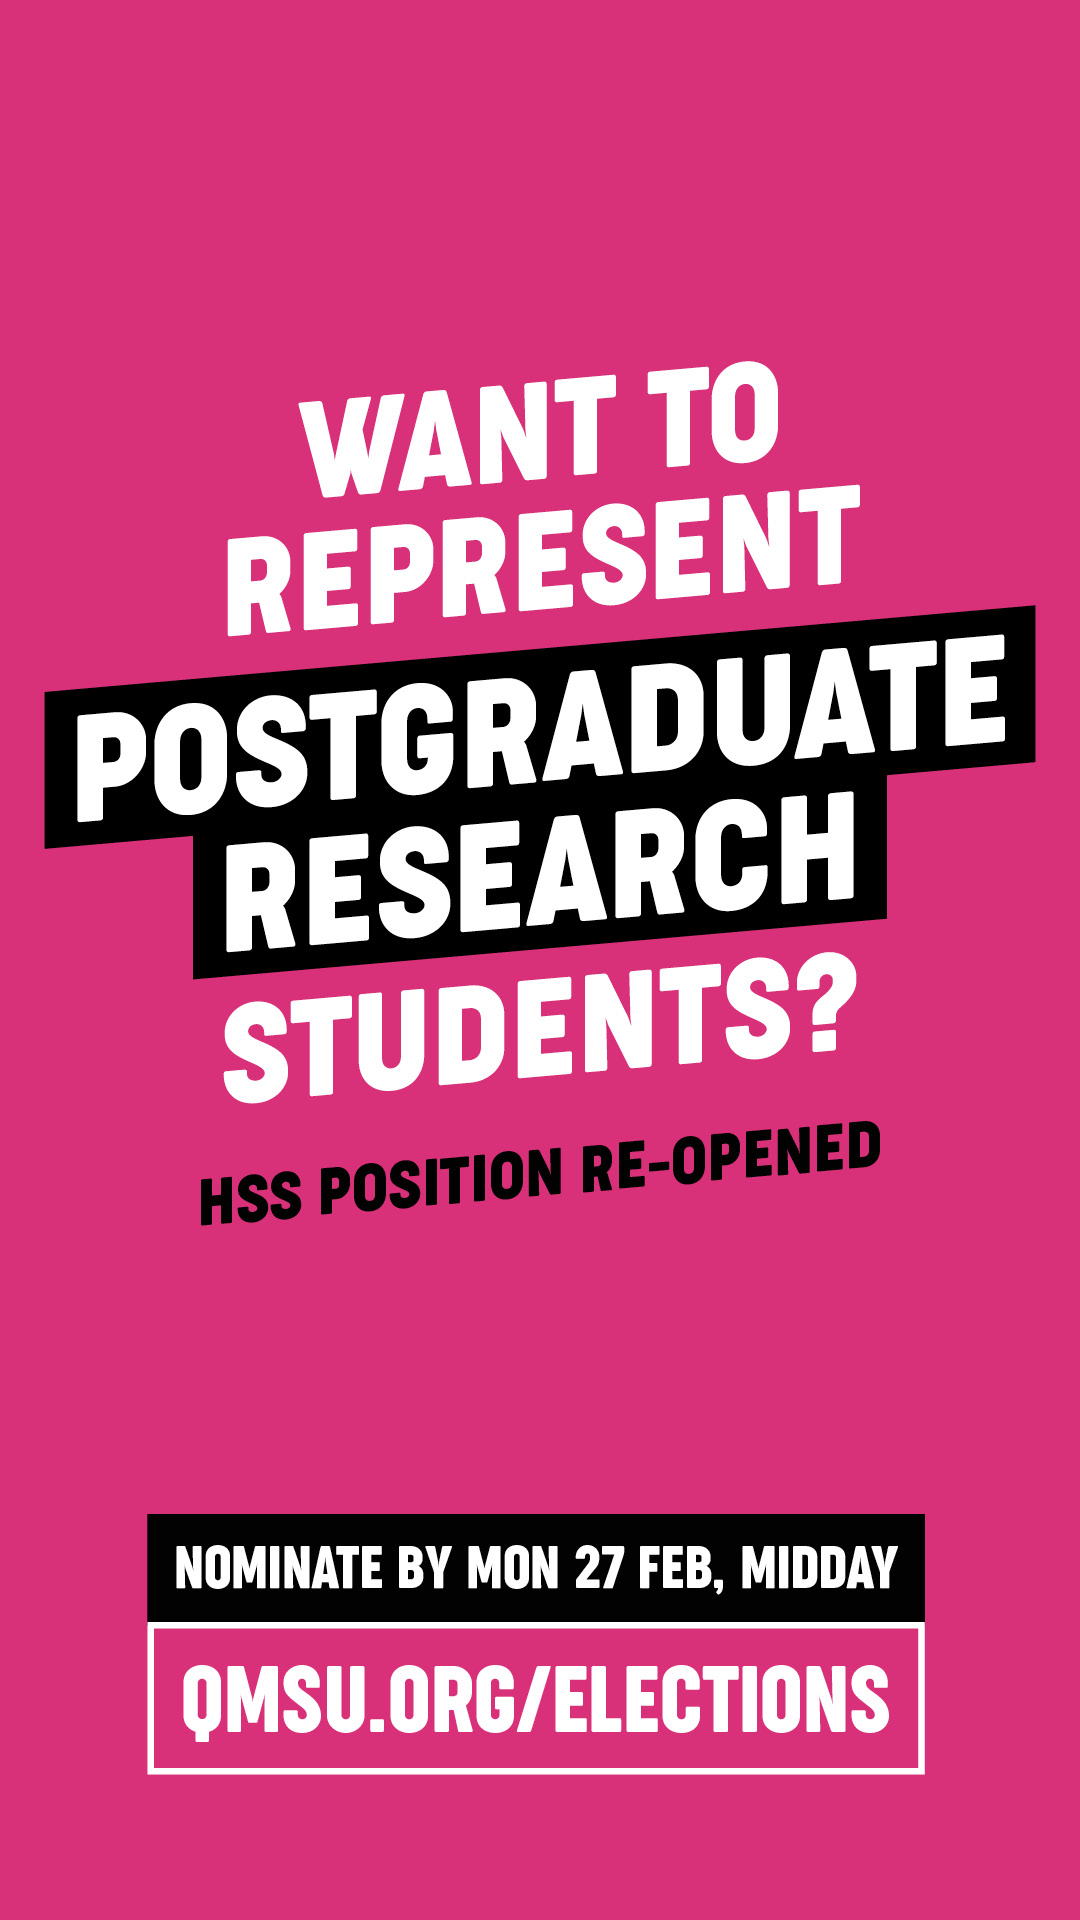 Re-open Nominations are now open for the Postgraduate Research Representative (HSS). Nominate by 27 Feb 2023 online www.qmsu.org/elections/nominate